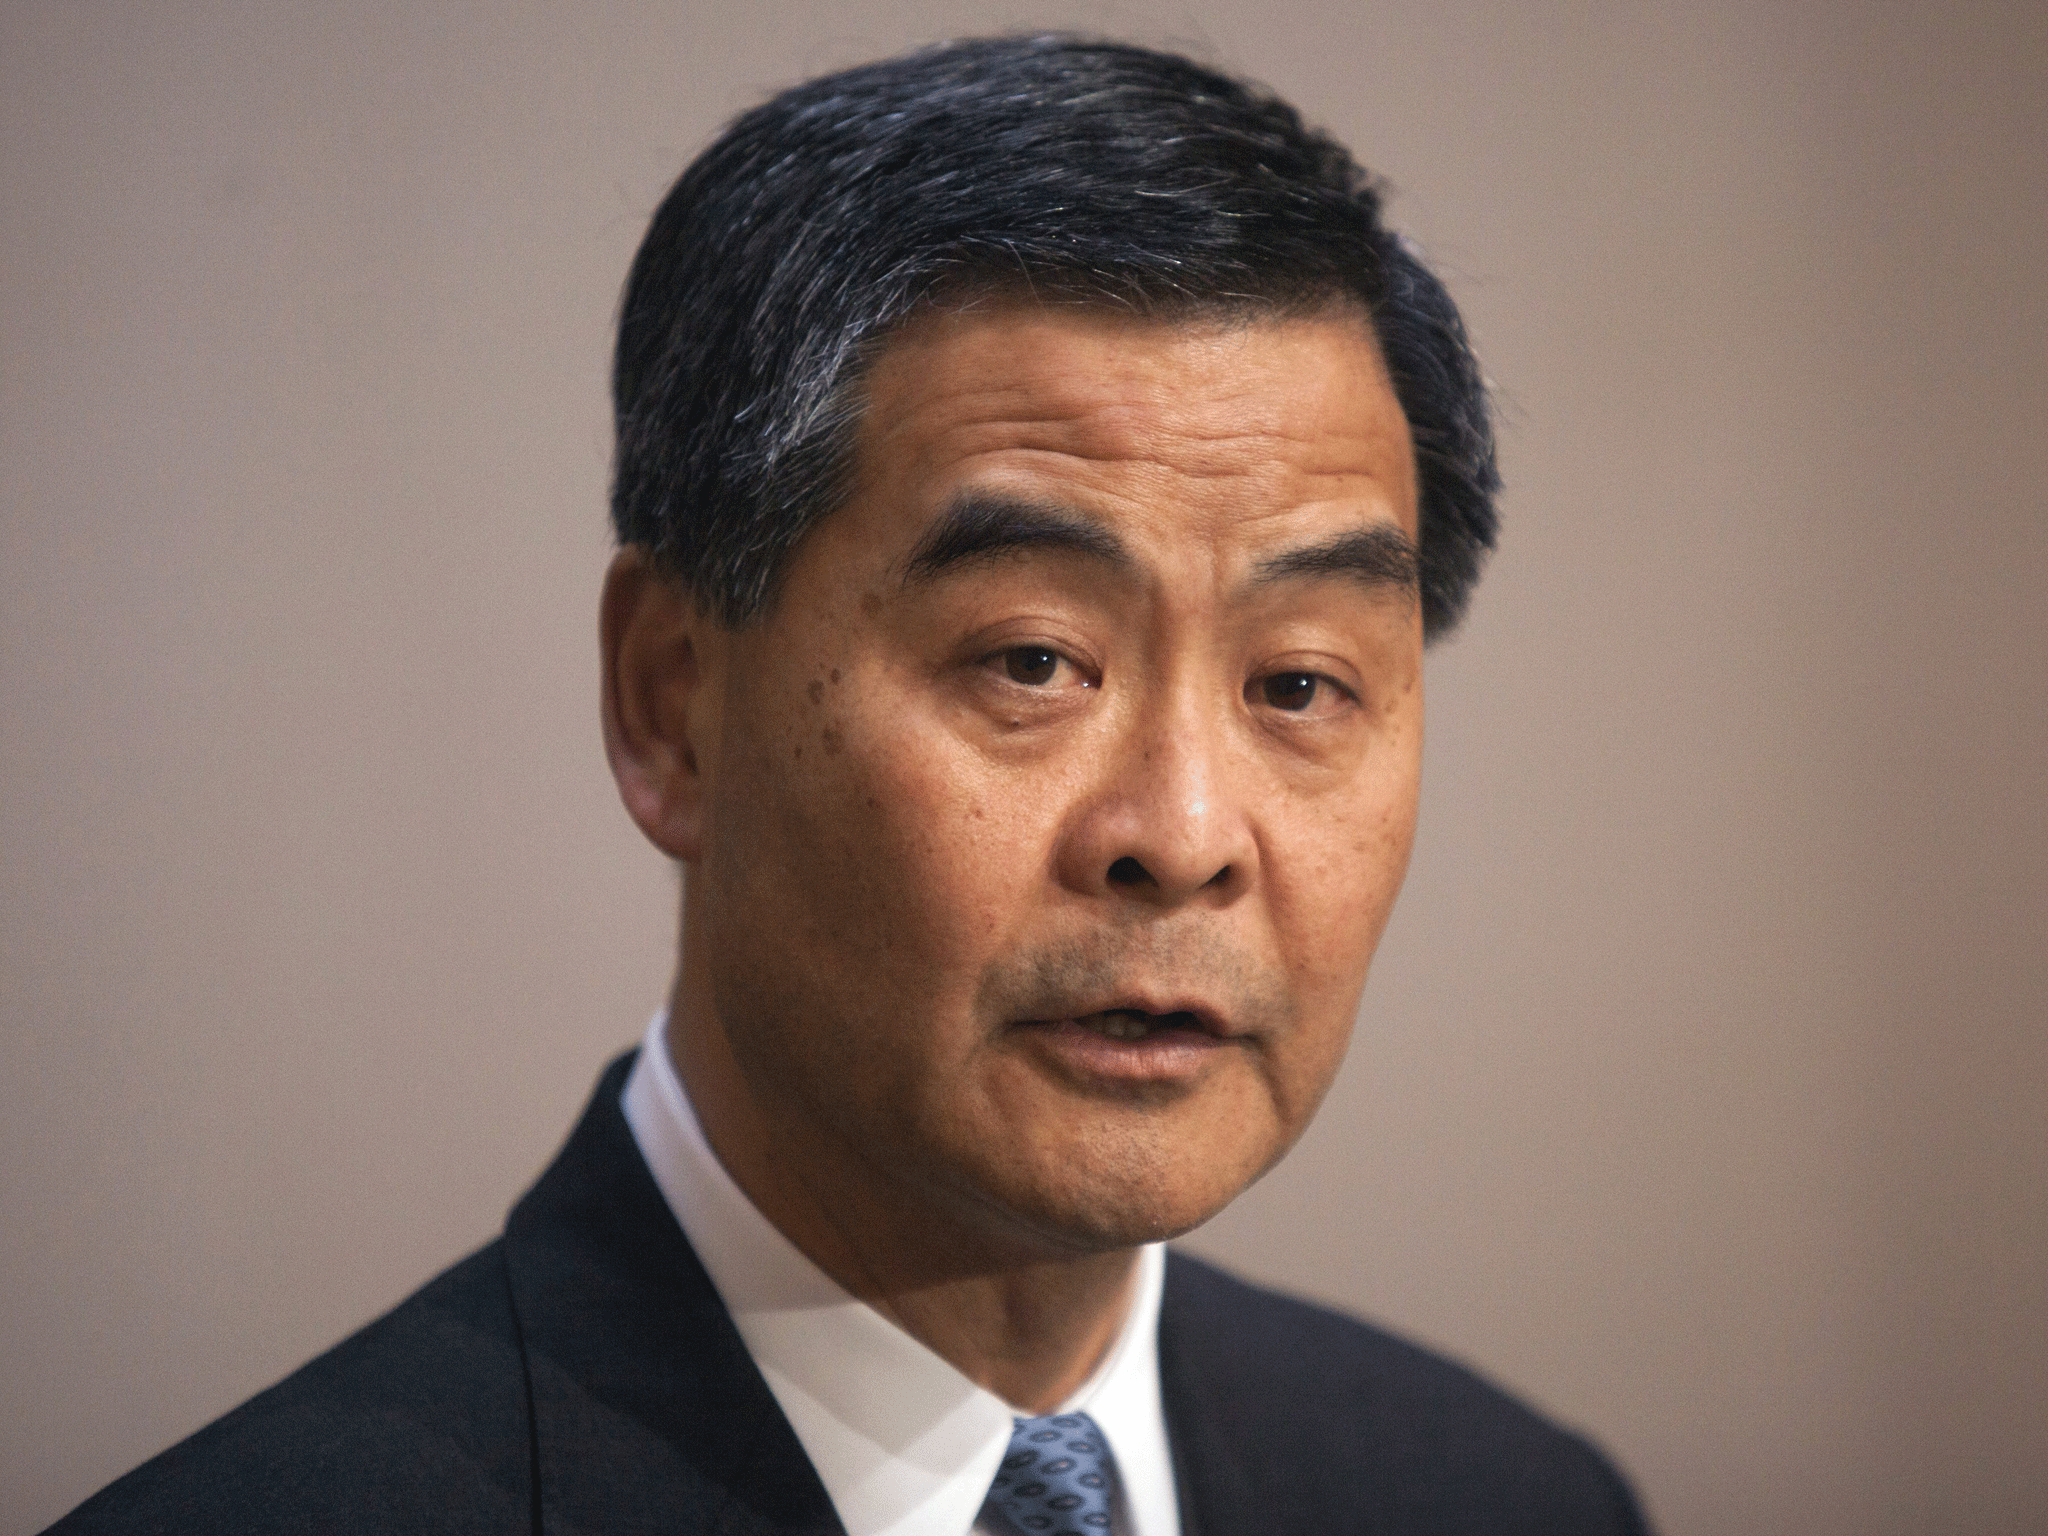 Hong Kong Chief Executive Leung Chun-ying, has told protesters he has no intention of stepping down